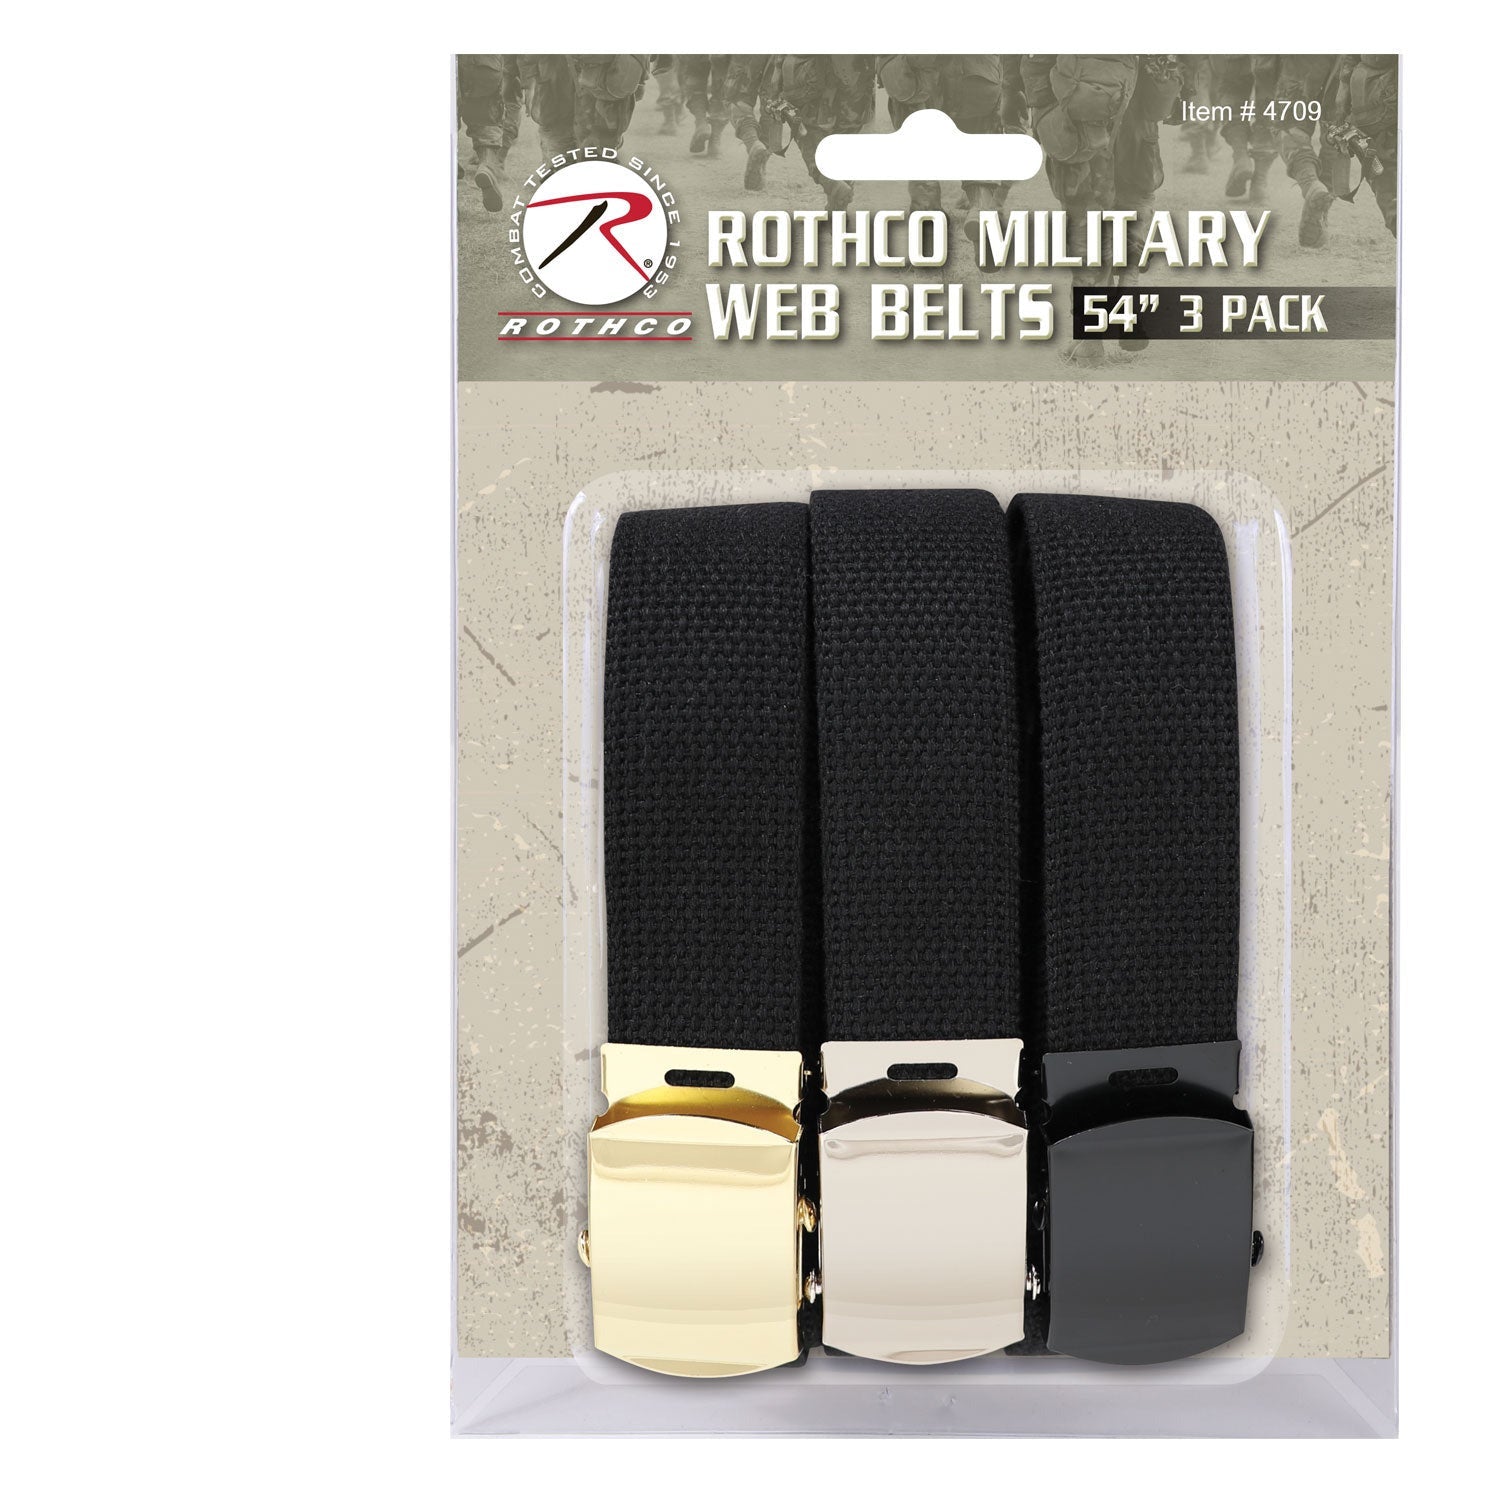 Rothco Military Web Belts In 3 Pack BLACK – Defence Q Store